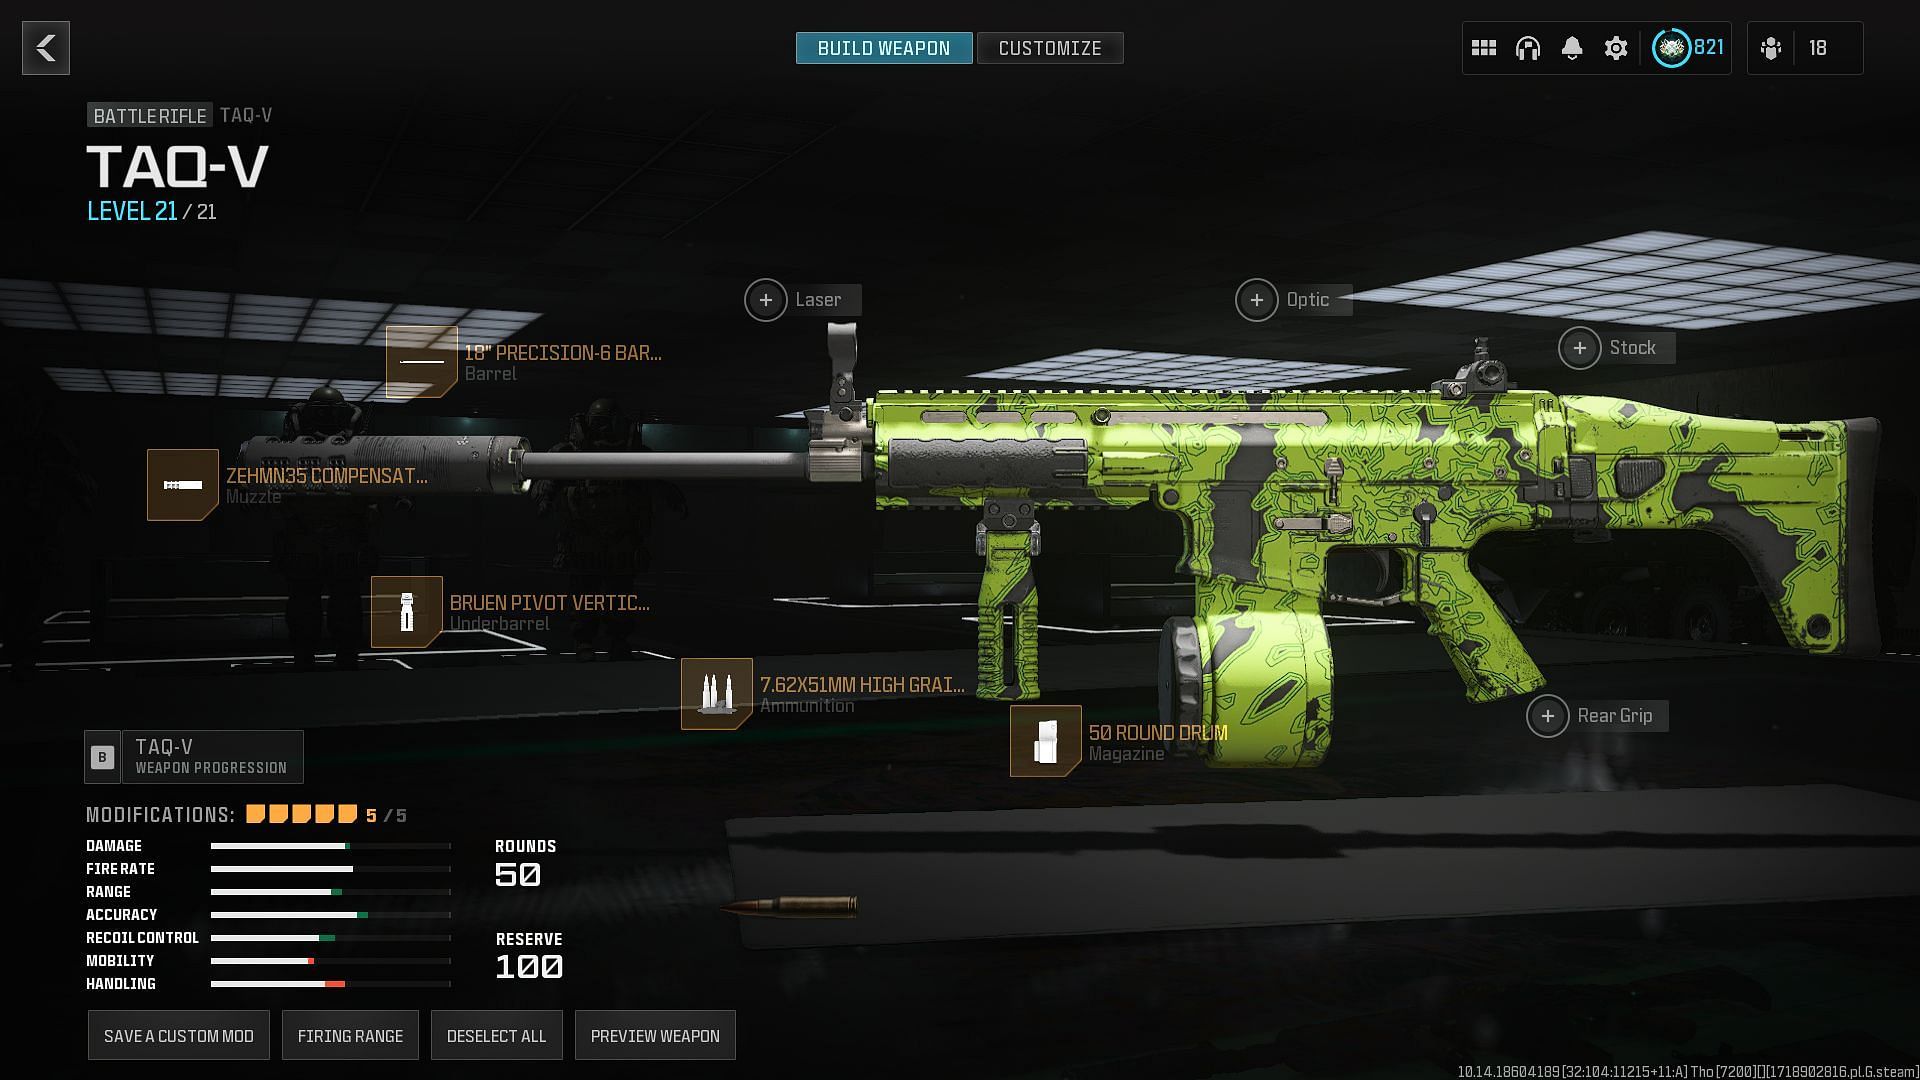 Best TAQ-V loadout in Warzone (Image via Activision)